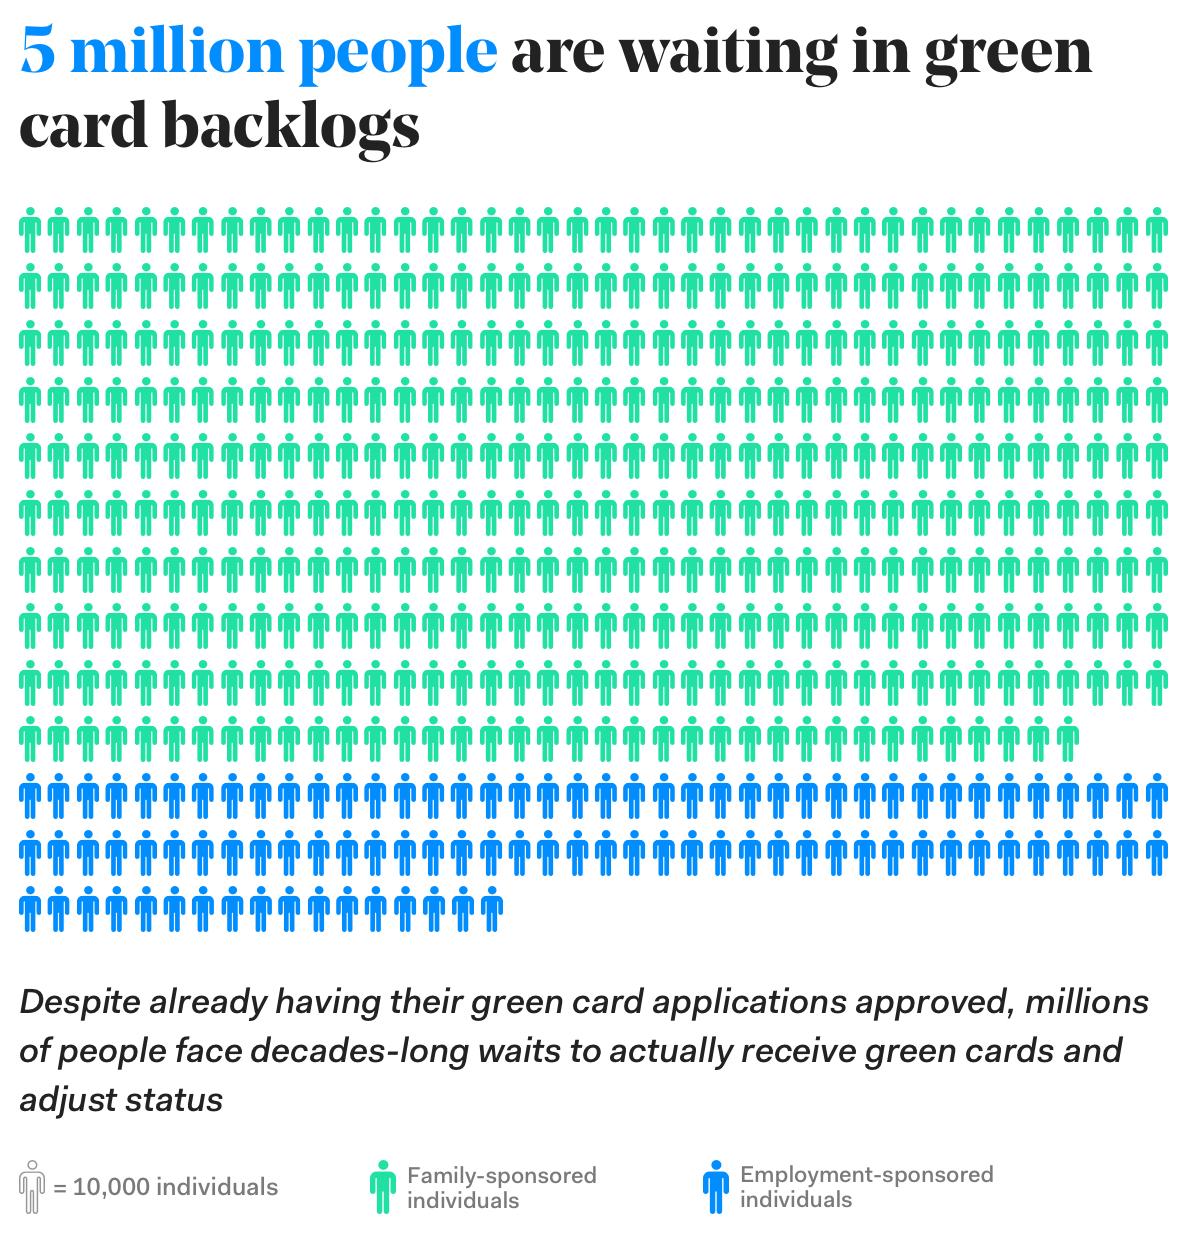 A chart illustrating that 5 million people are stuck waiting in green card backlogs, including nearly 4 million family-sponsored individuals and nearly 1 million employment-sponsored individuals